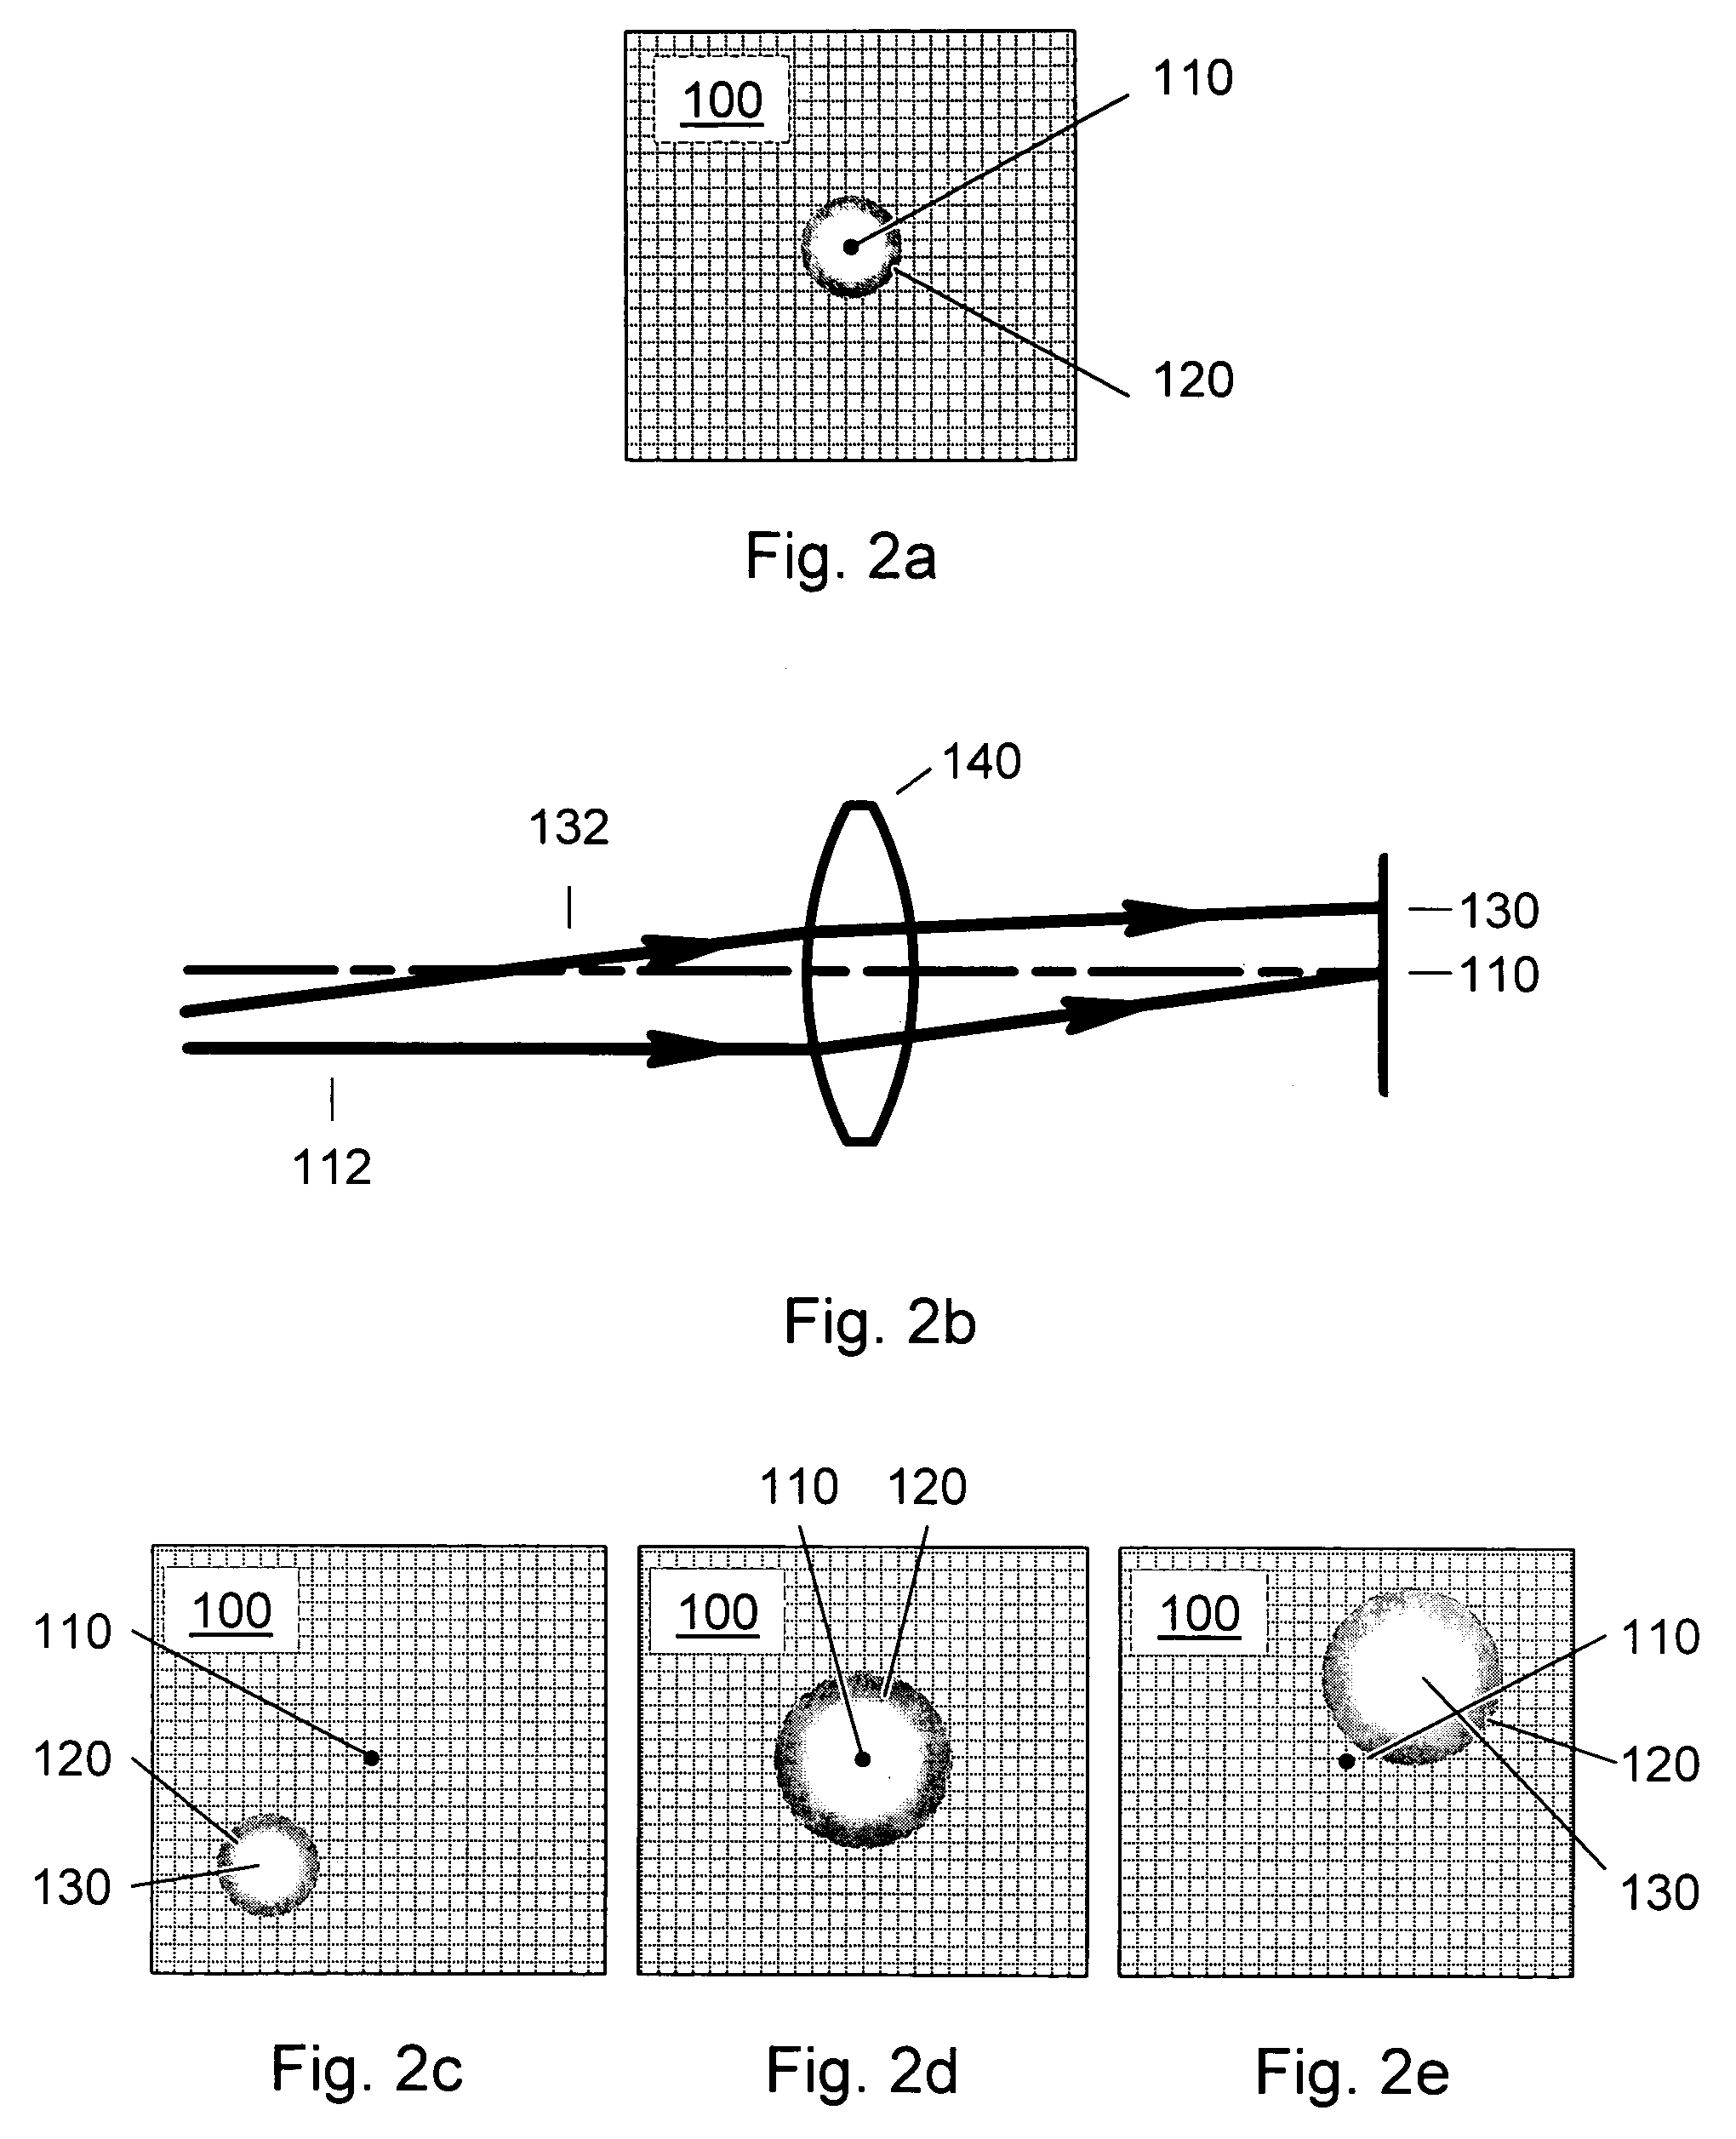 Method to determine and adjust the alignment of the transmitter and receiver fields of view of a LIDAR system